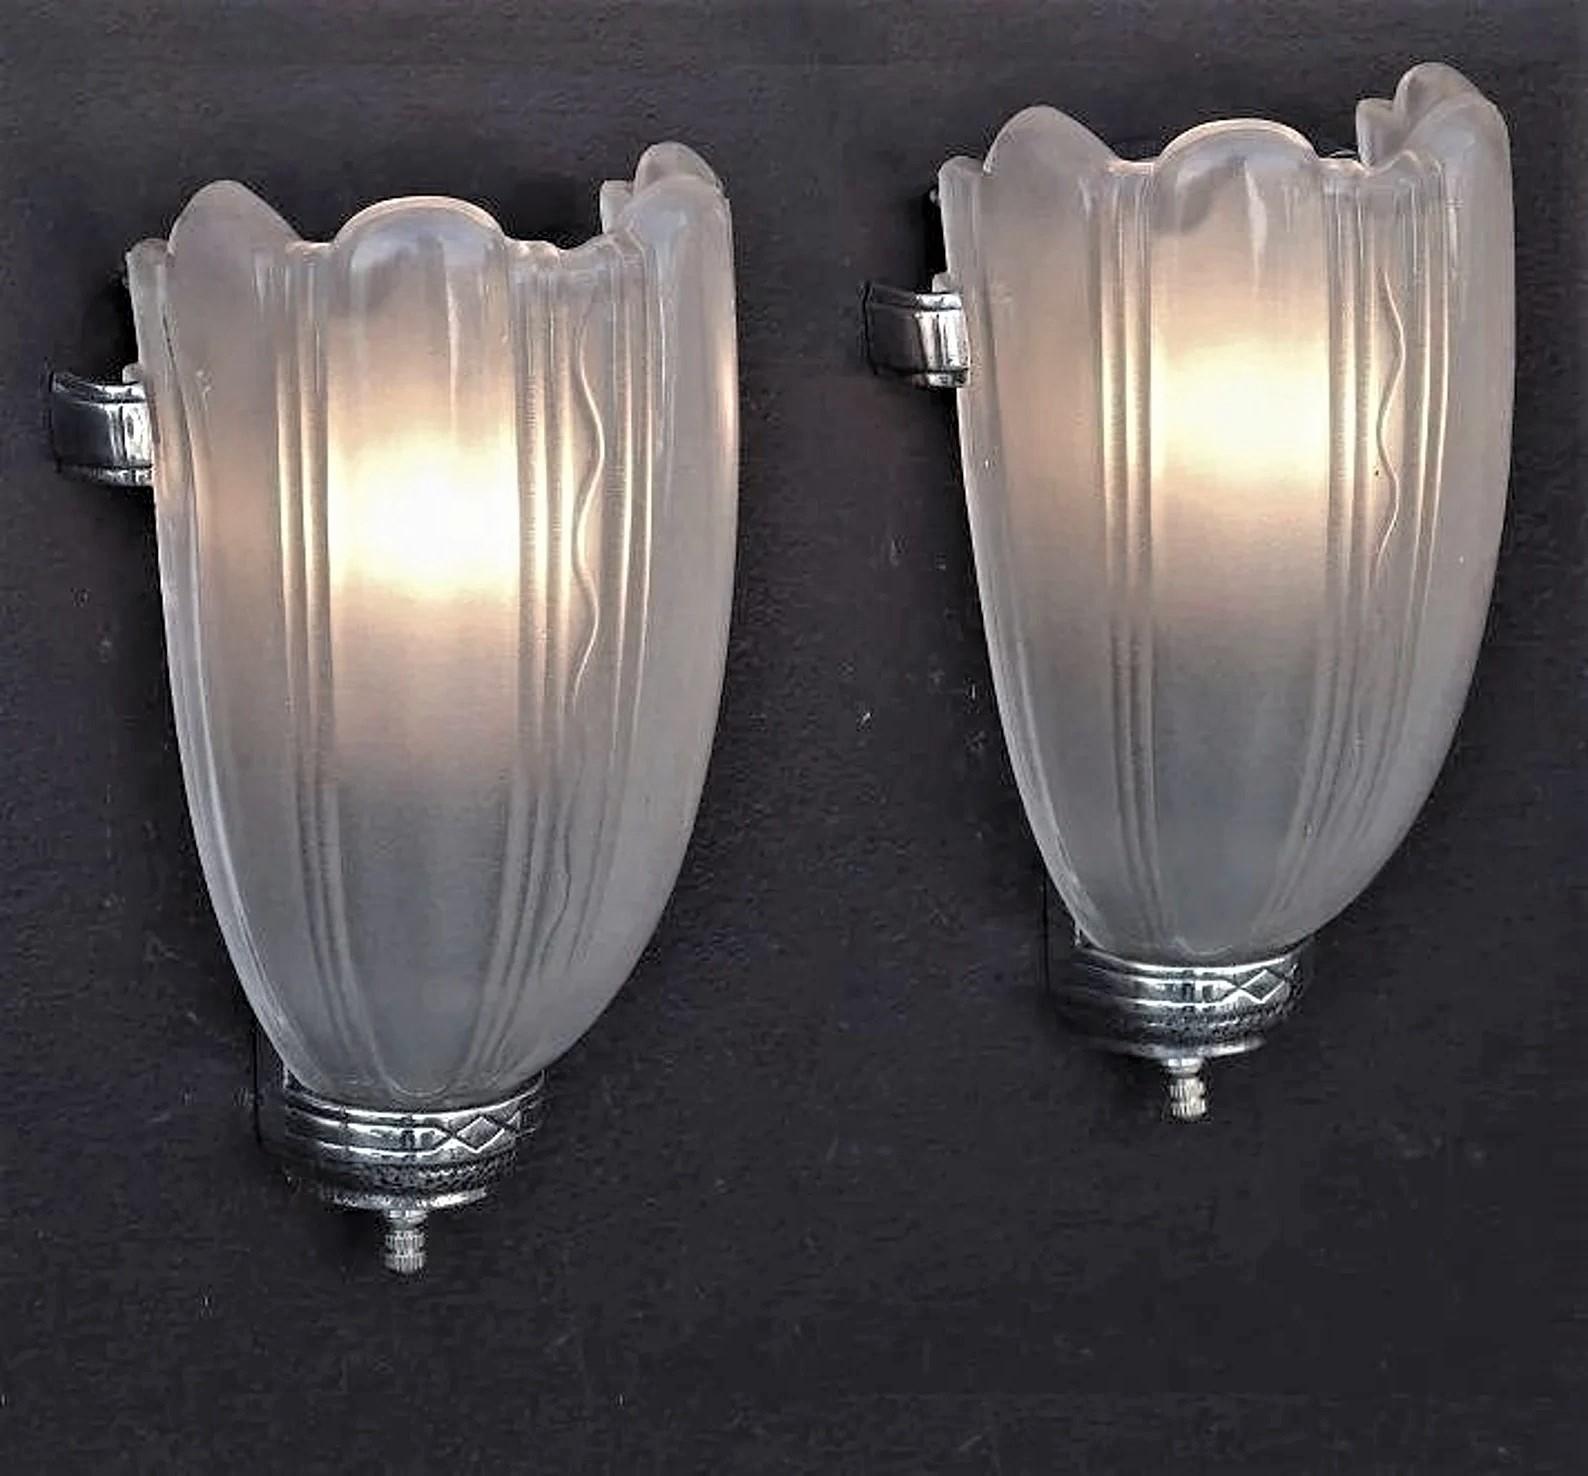 Polished Two Pair Deco Streamline Sconces, c.1930, priced per pair